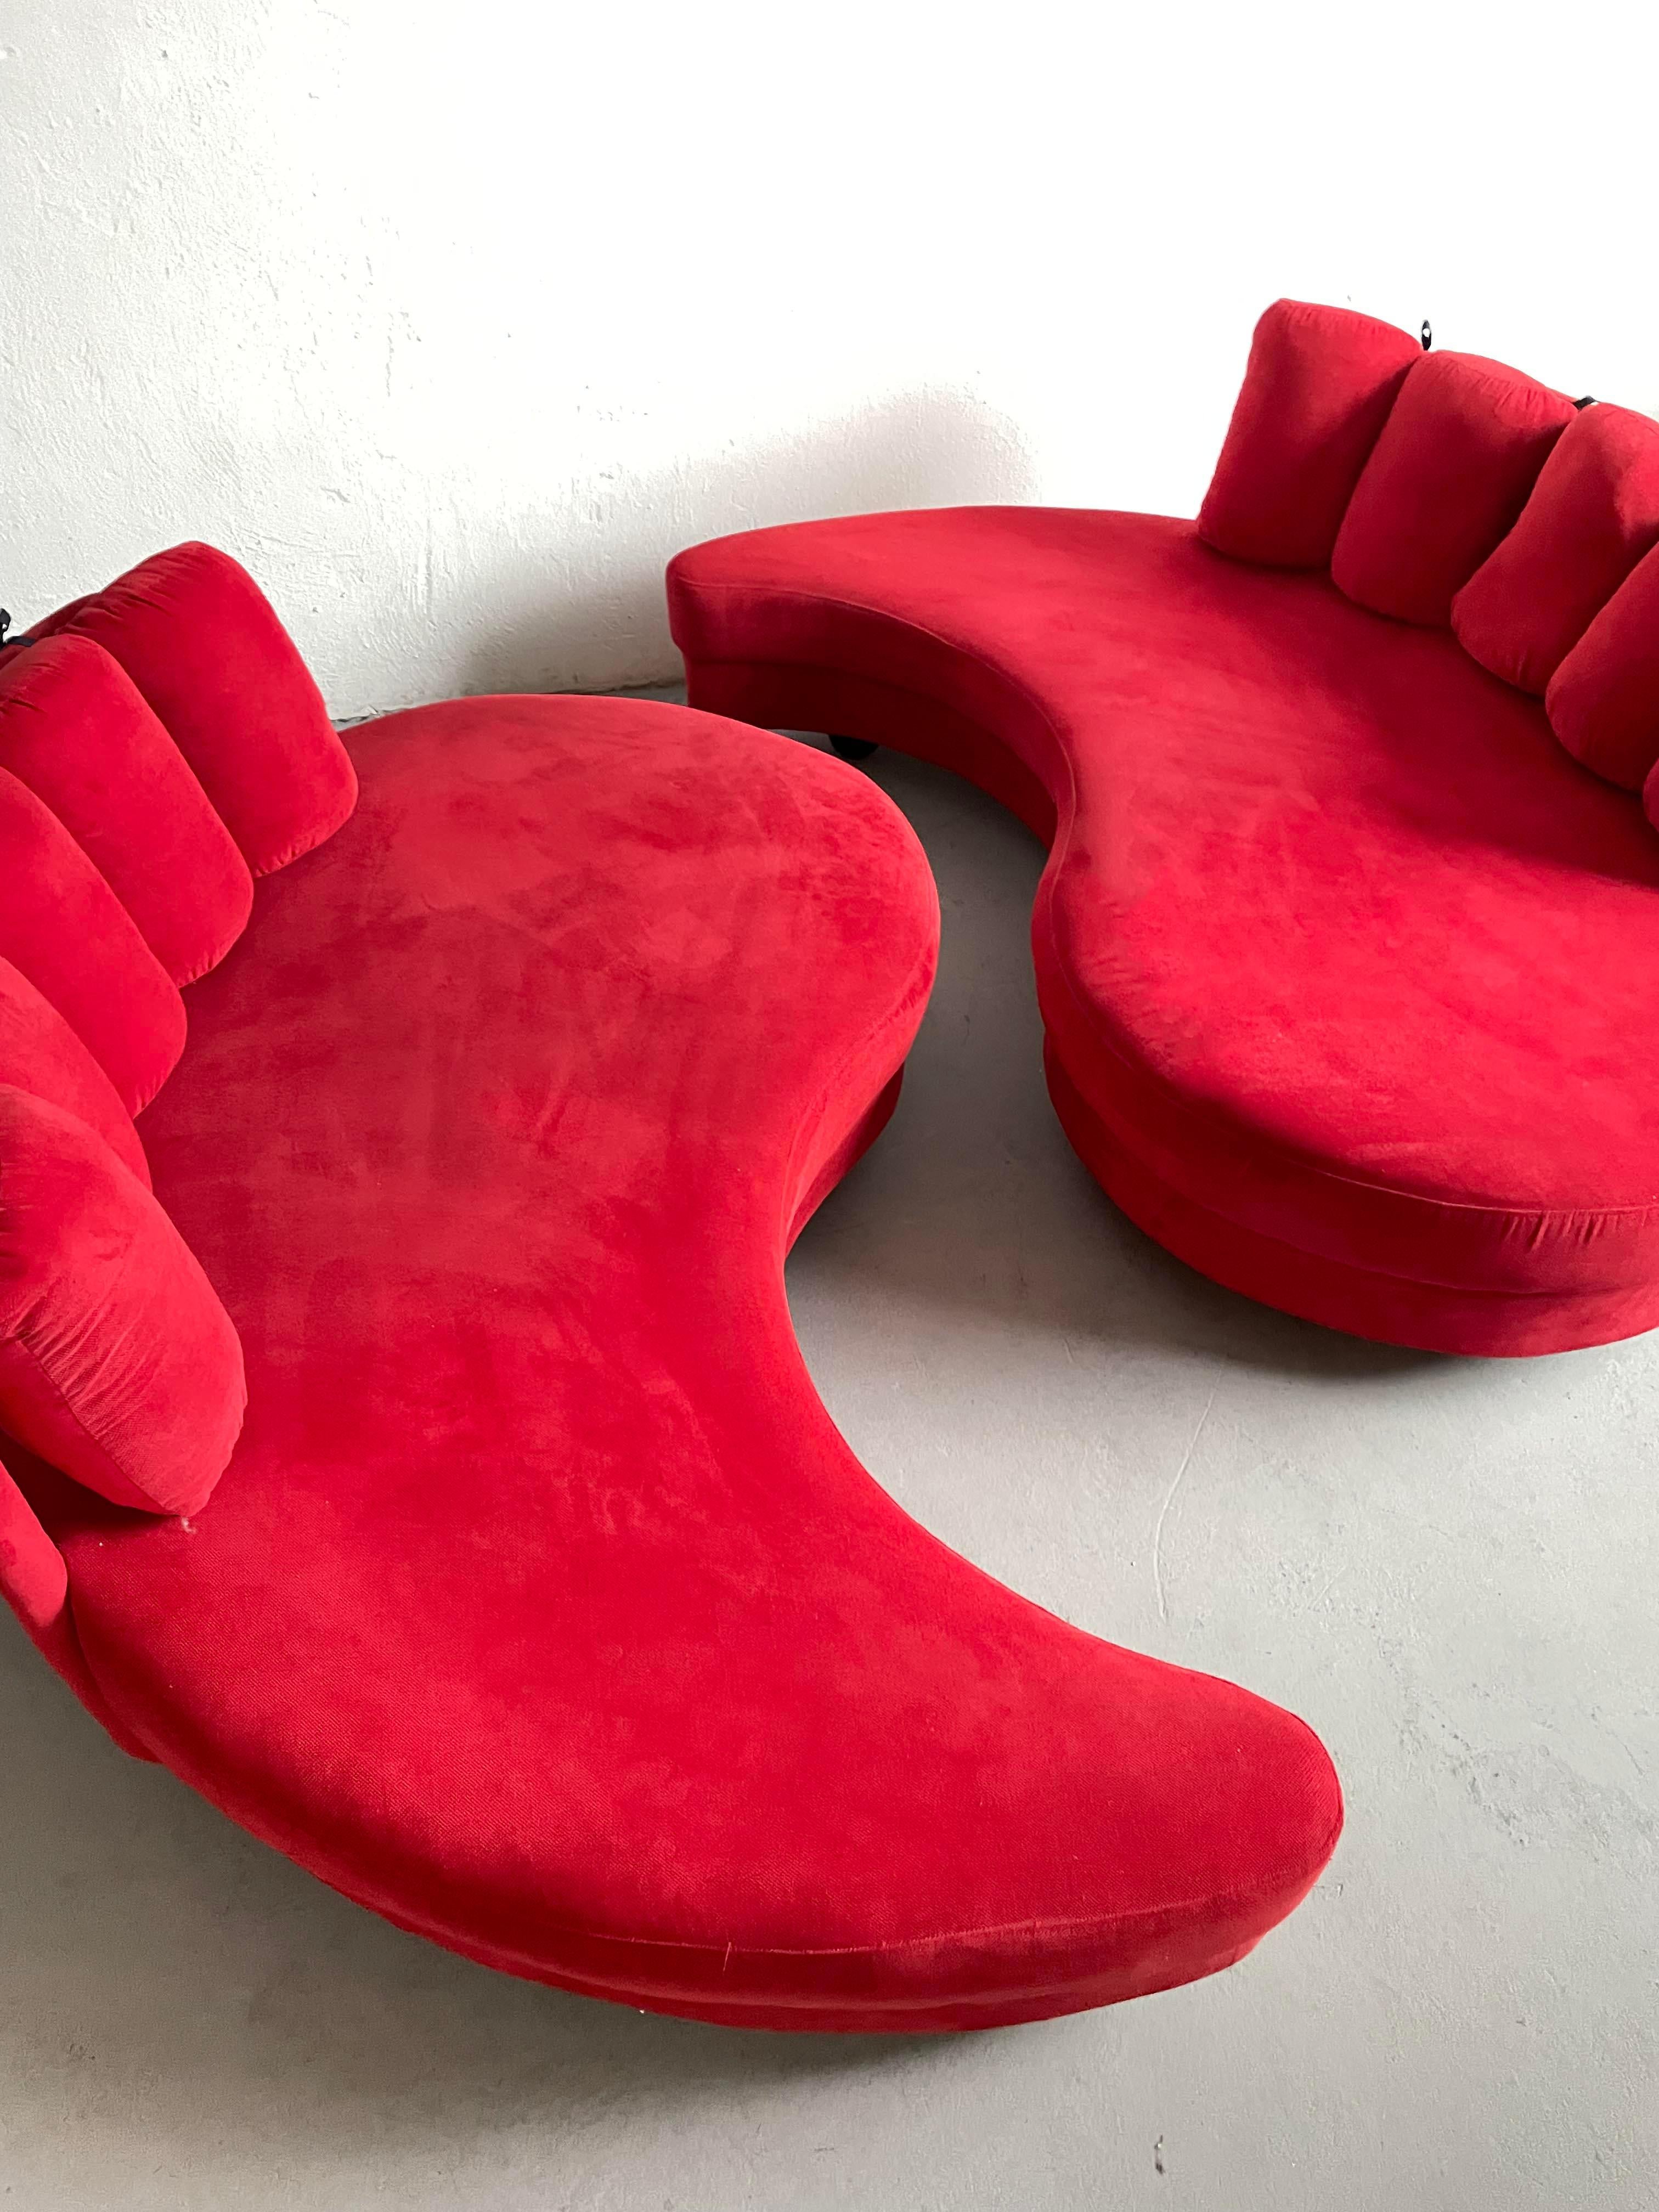 Post-Modern Set of 2 Postmodern Curved Yin-Yang Shaped Sofa Daybeds in Red Fabric, c 1980s For Sale